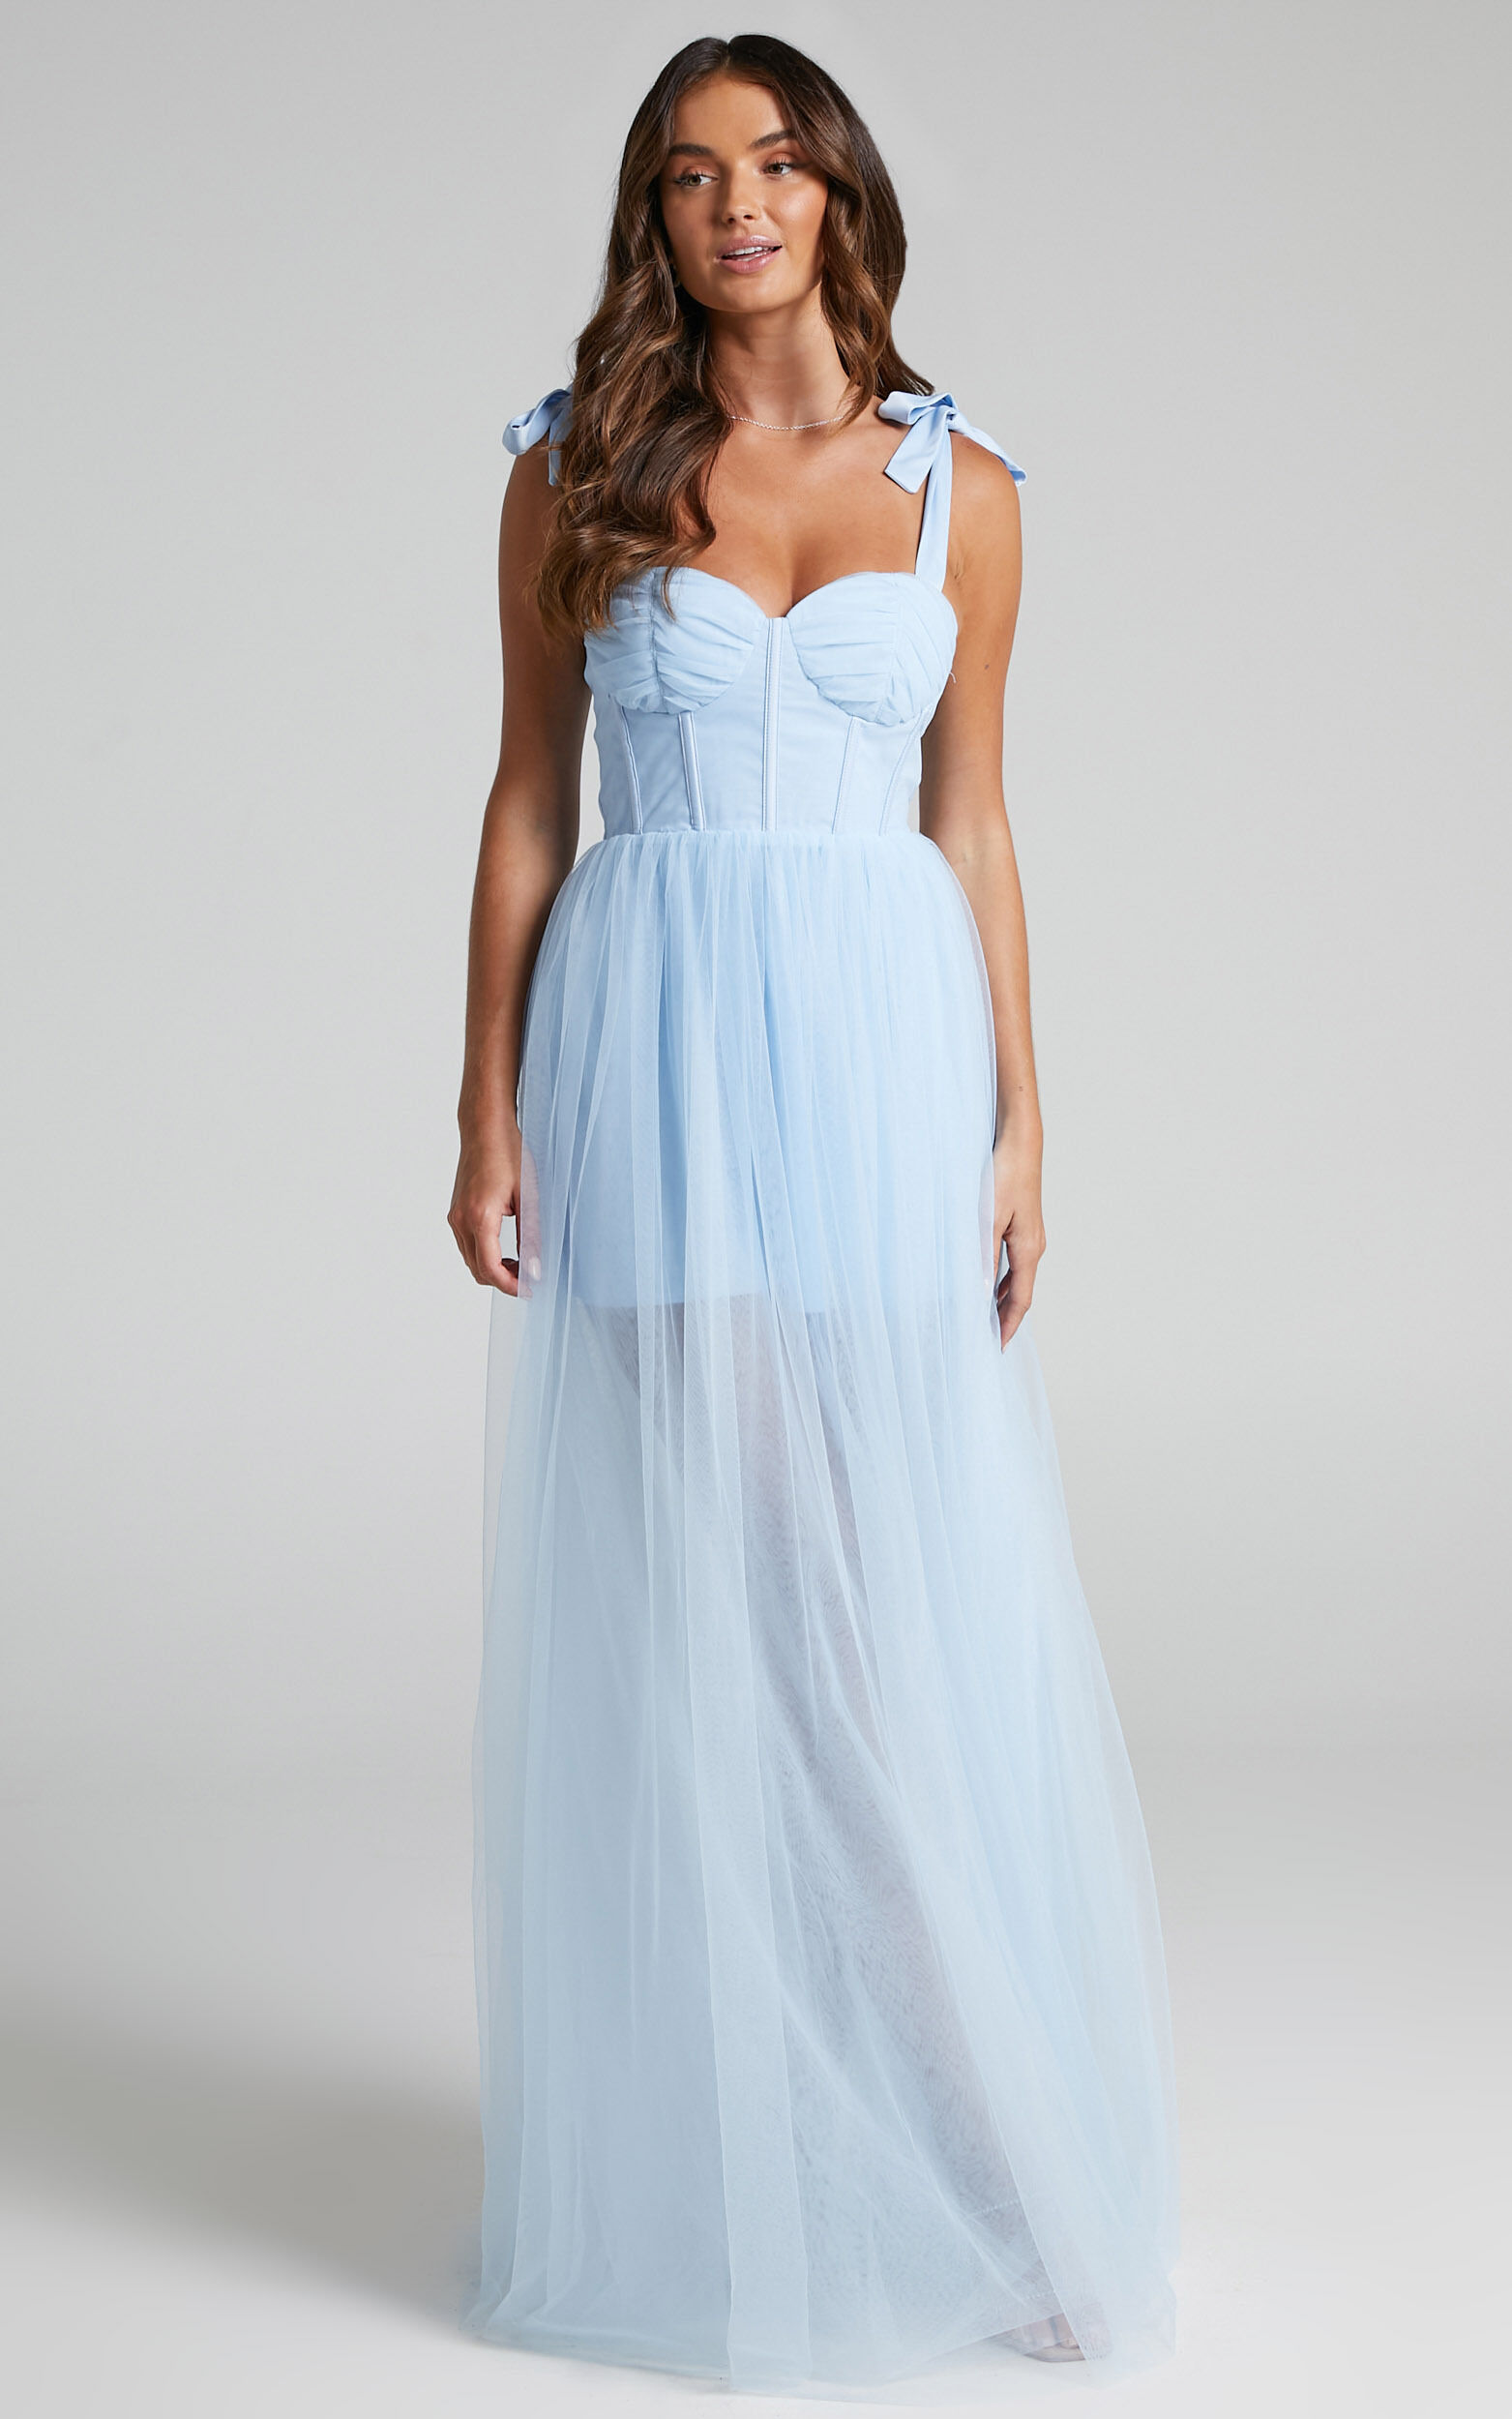 Emmary Gown - Bustier Bodice Tulle Gown in Pale Blue